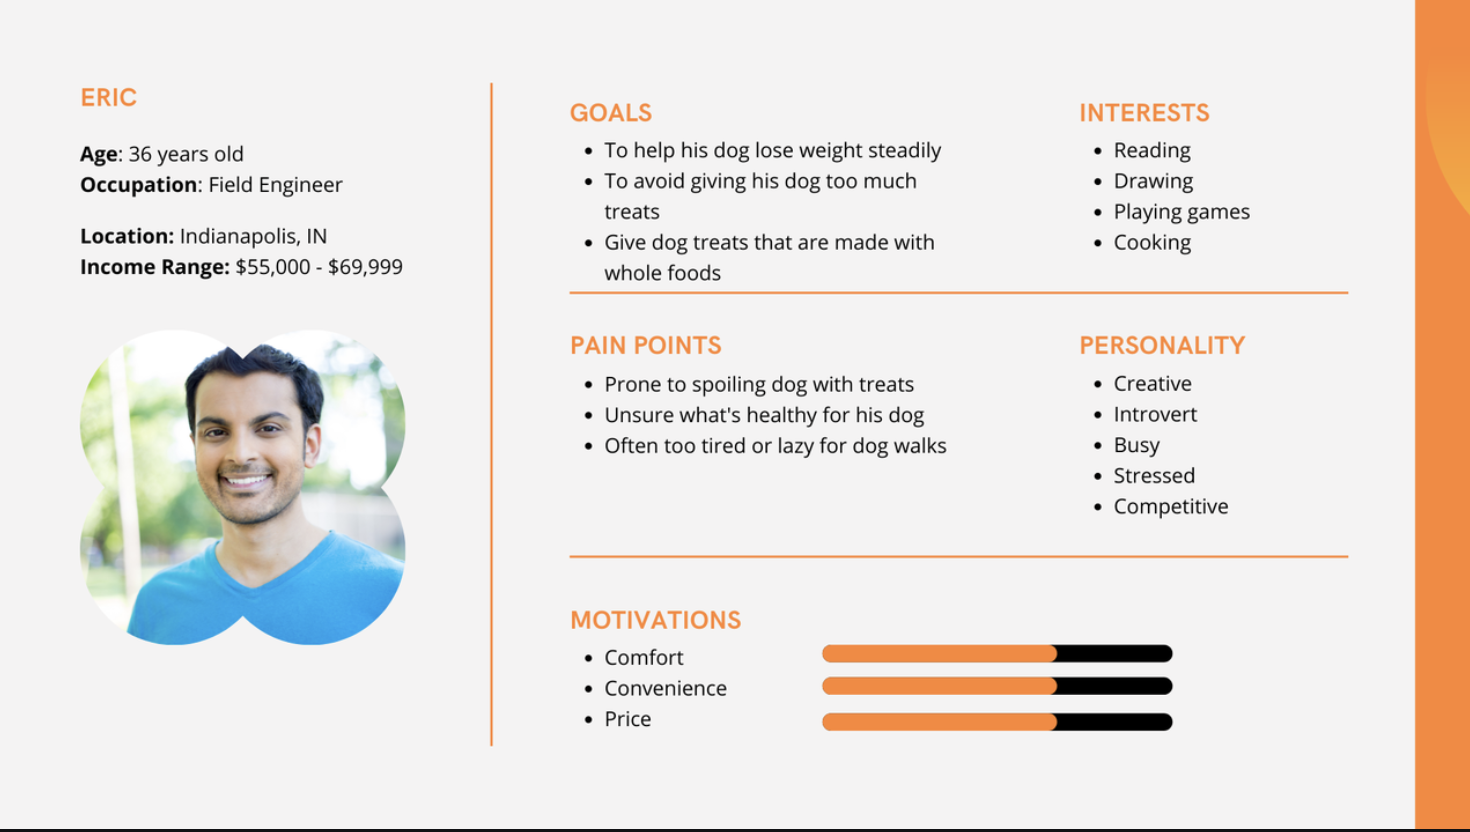 The buyer persona for "Eric" that describes him in the left column, includes a photo of a man wearing a blue shirt, and orange text with "Goals" "Interests" "Pain Points" "Personality" and "Motivations." 